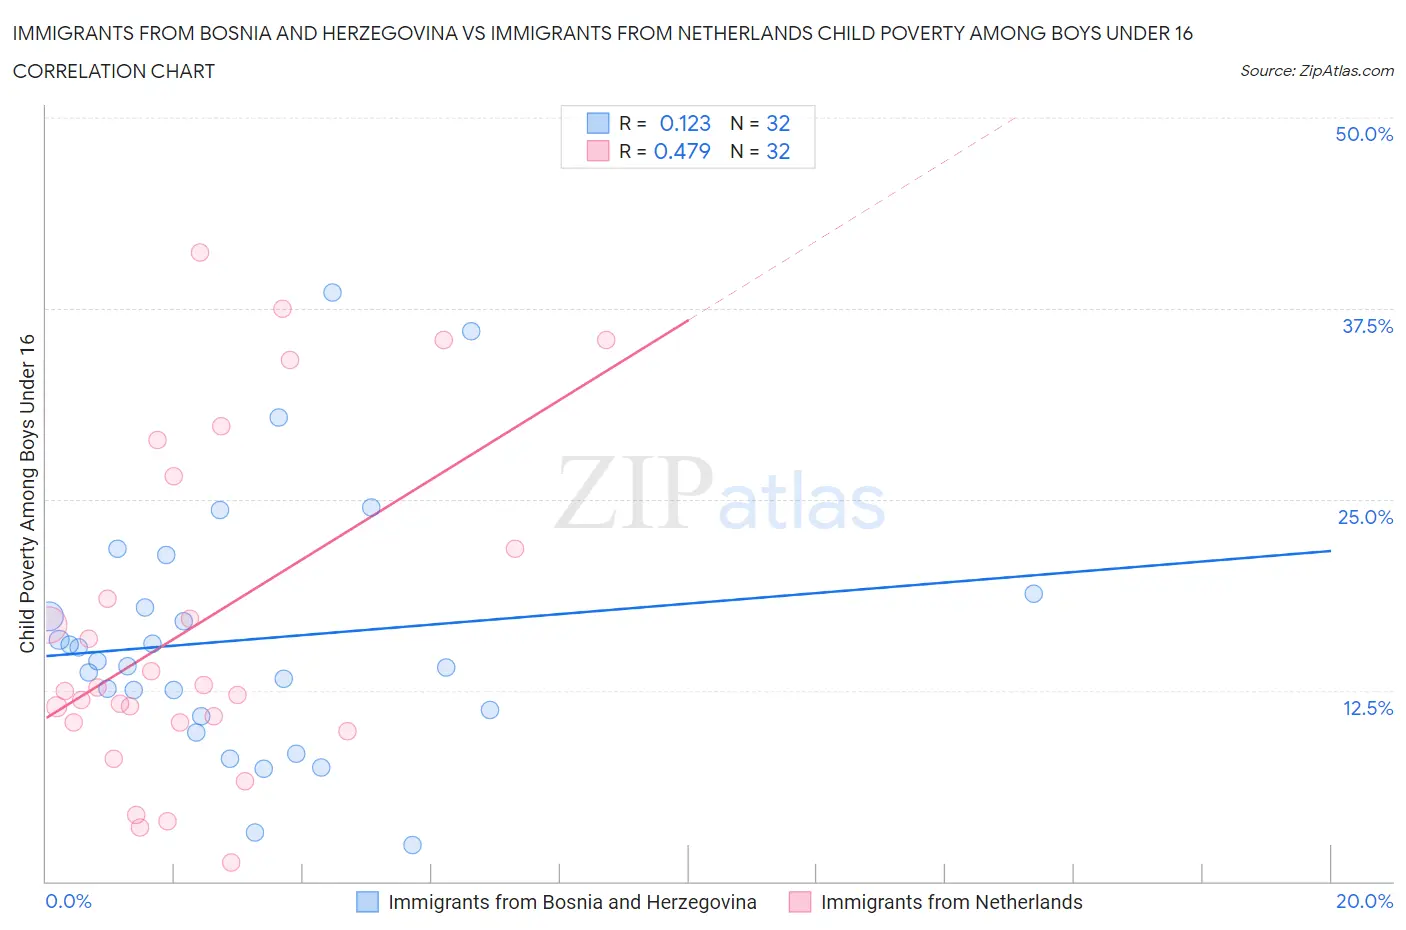 Immigrants from Bosnia and Herzegovina vs Immigrants from Netherlands Child Poverty Among Boys Under 16